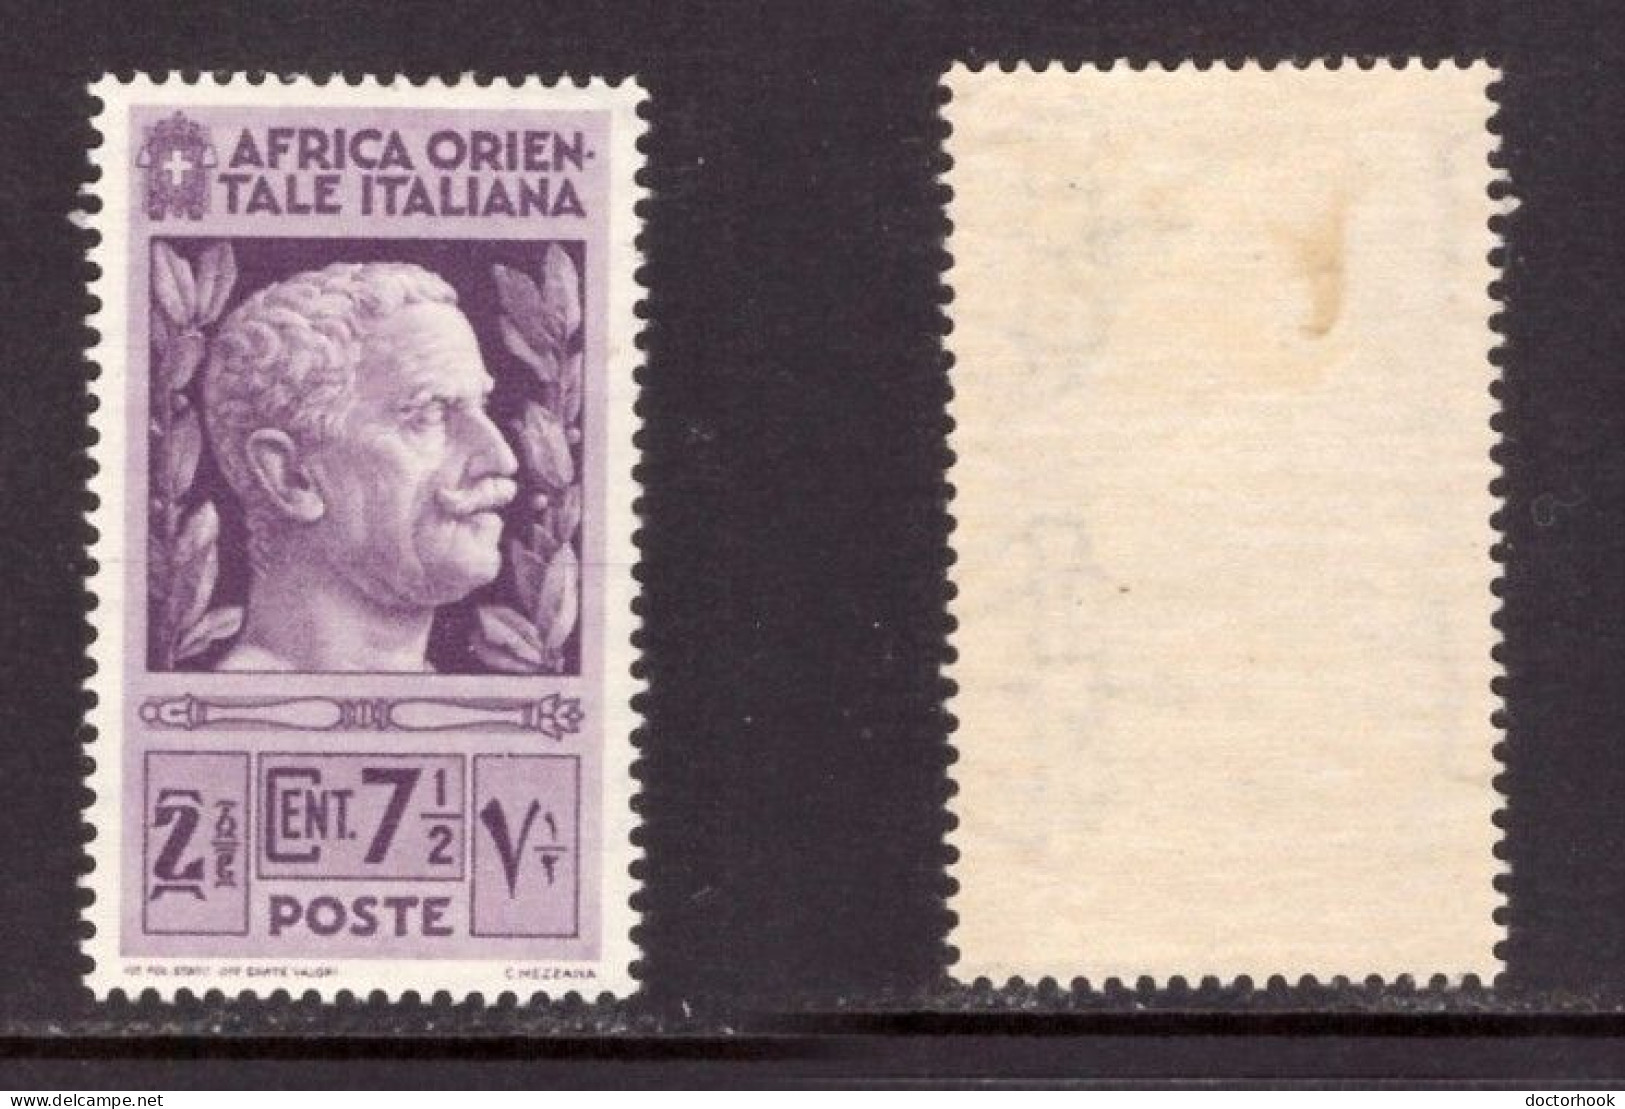 ITALIAN EAST AFRICA   Scott # 3* MINT HINGED (CONDITION AS PER SCAN) (Stamp Scan # 956-6) - Africa Orientale